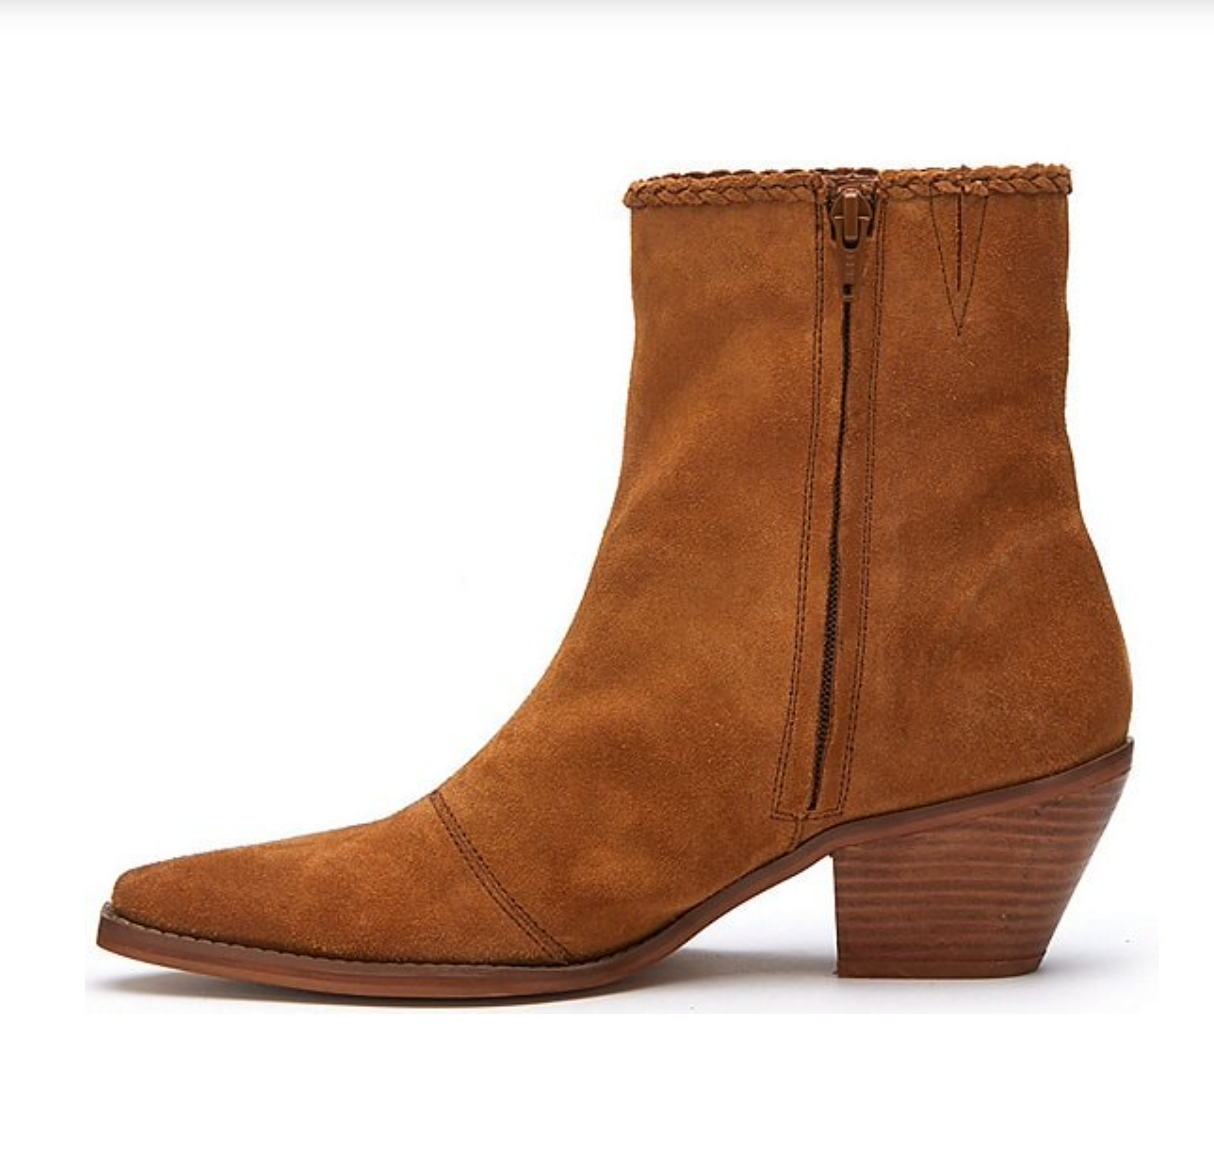 Arial Saddle Brown Boots